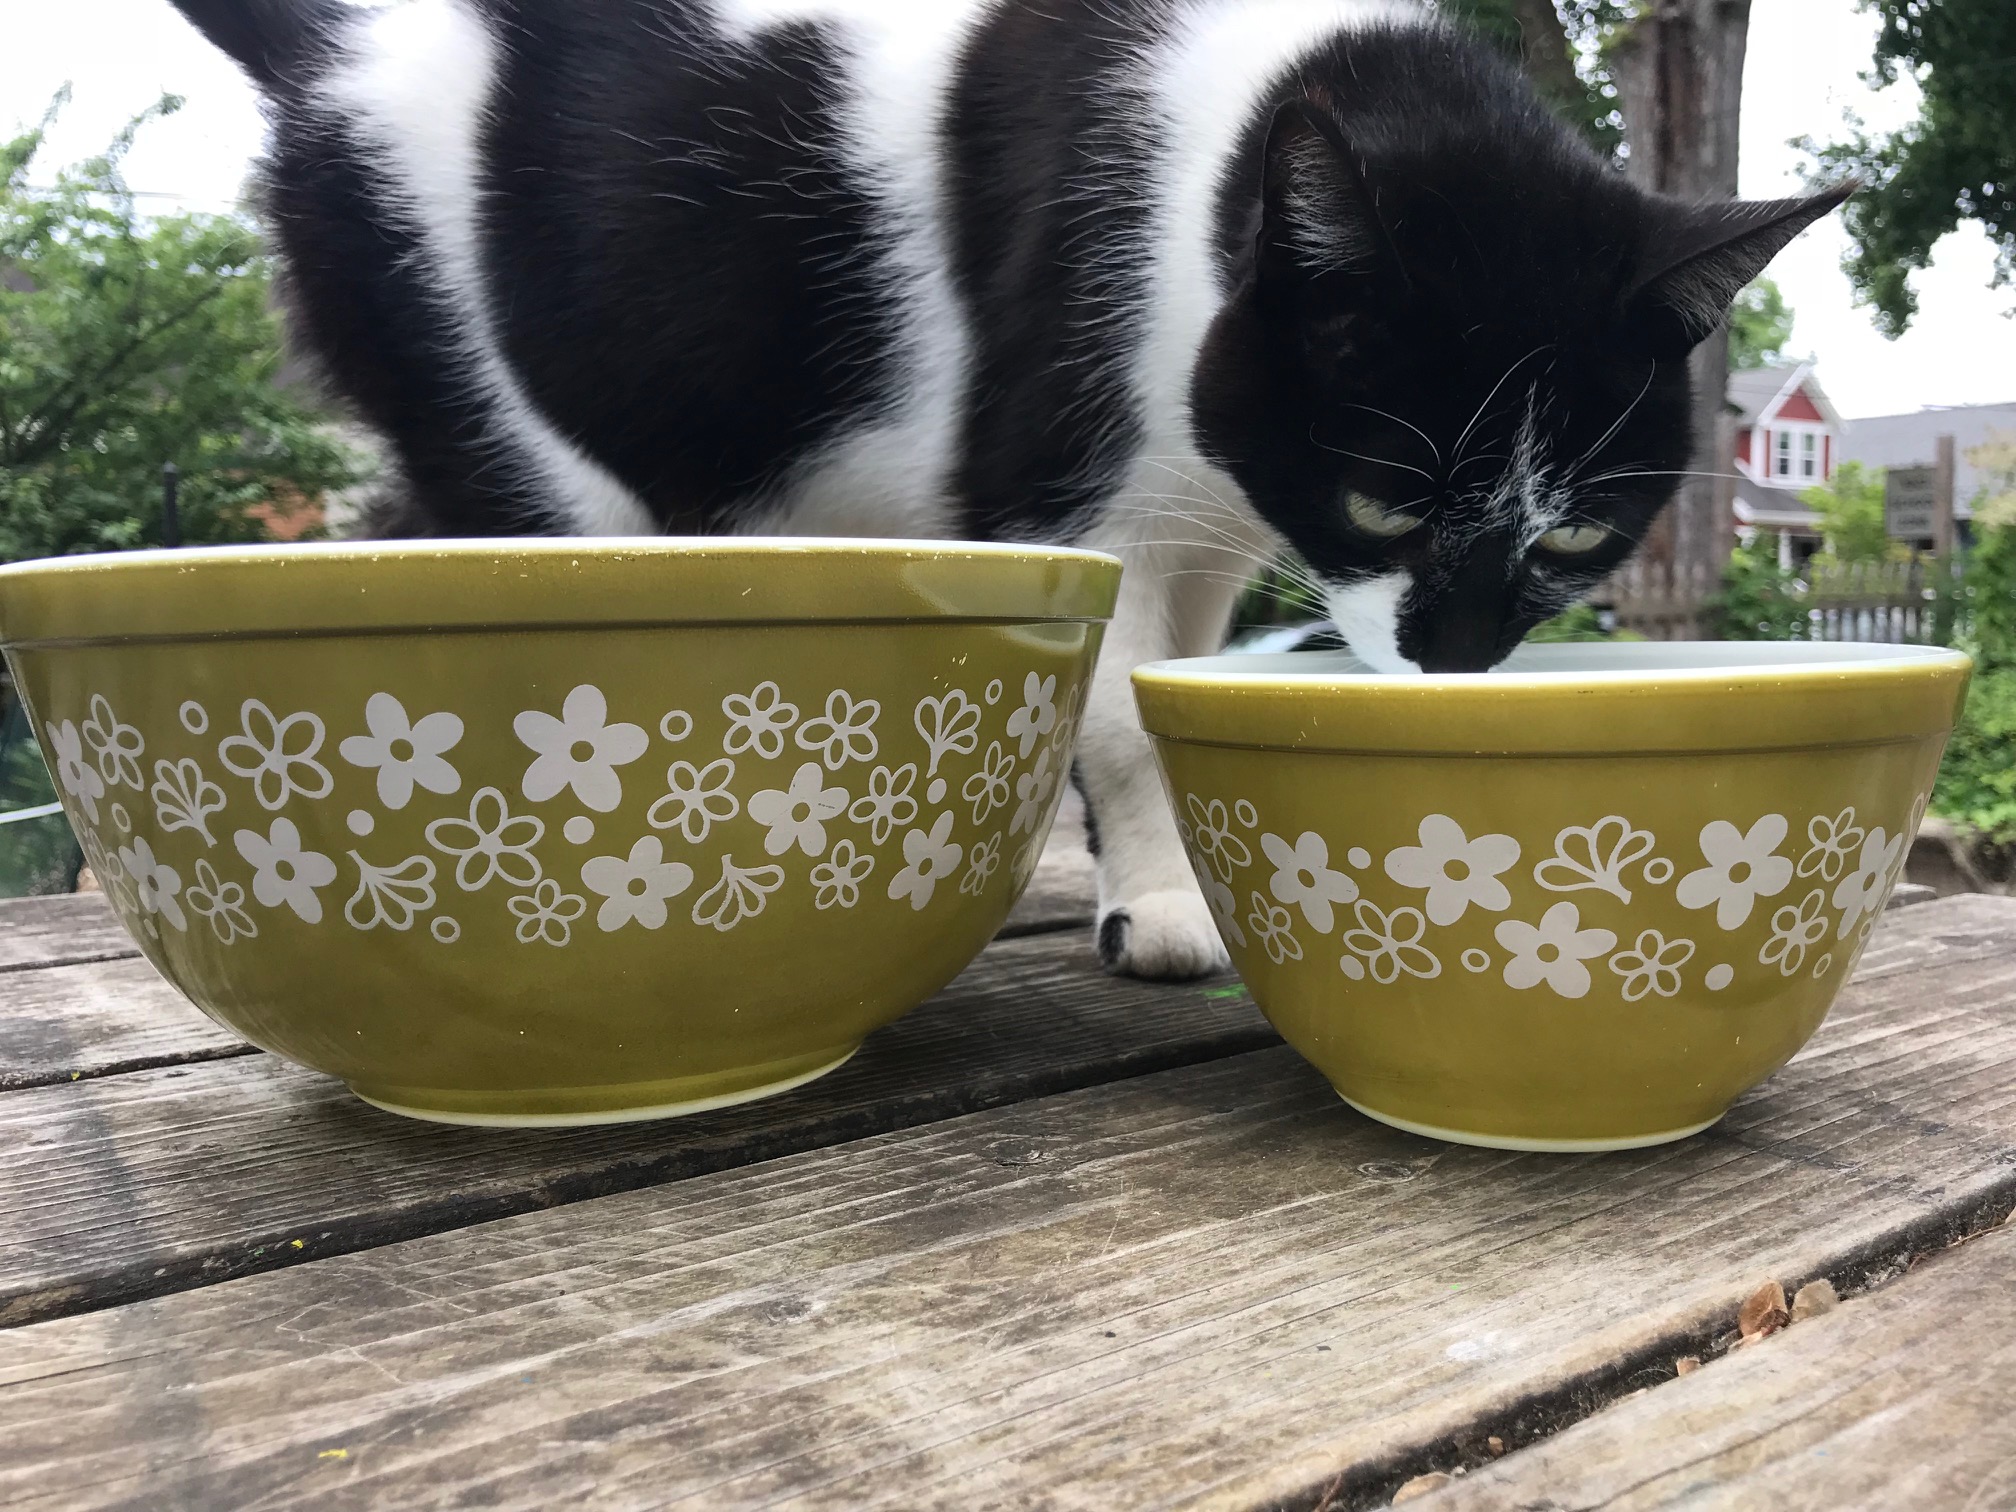 Vintage Pyrex Spring Blossom Green Crazy Daisy Mixing Bowls: 109,900 ppm Lead